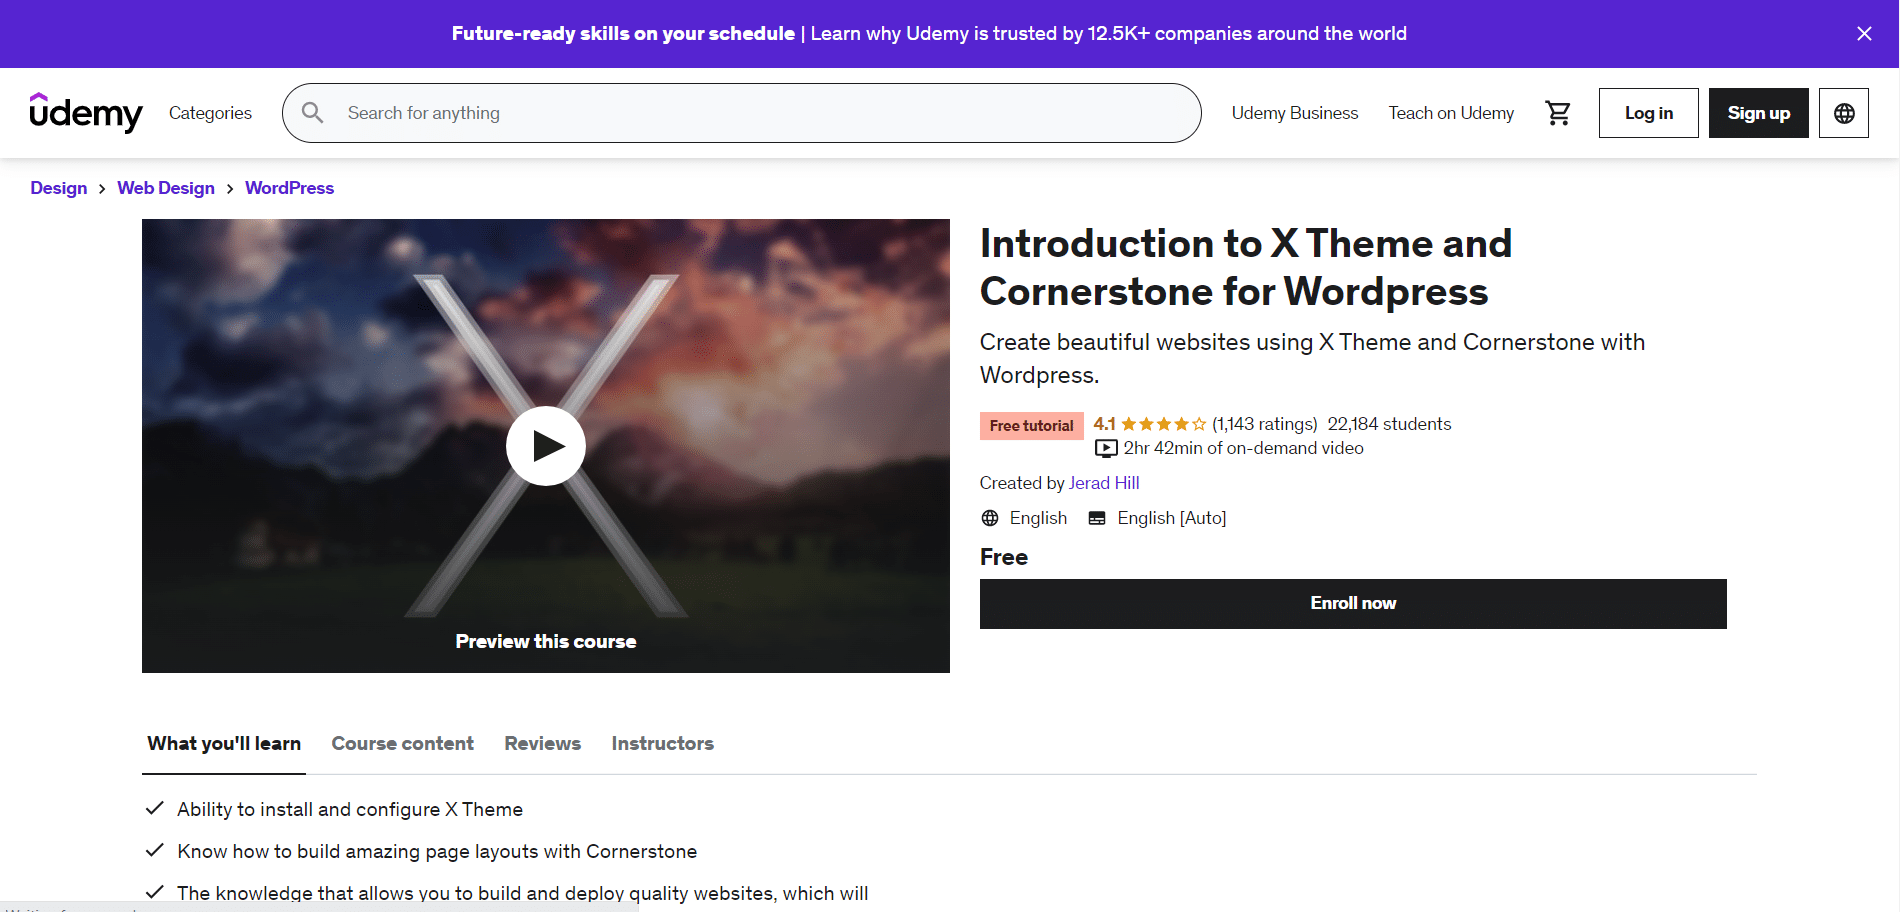 Introduction to X Theme and Cornerstone for WordPress